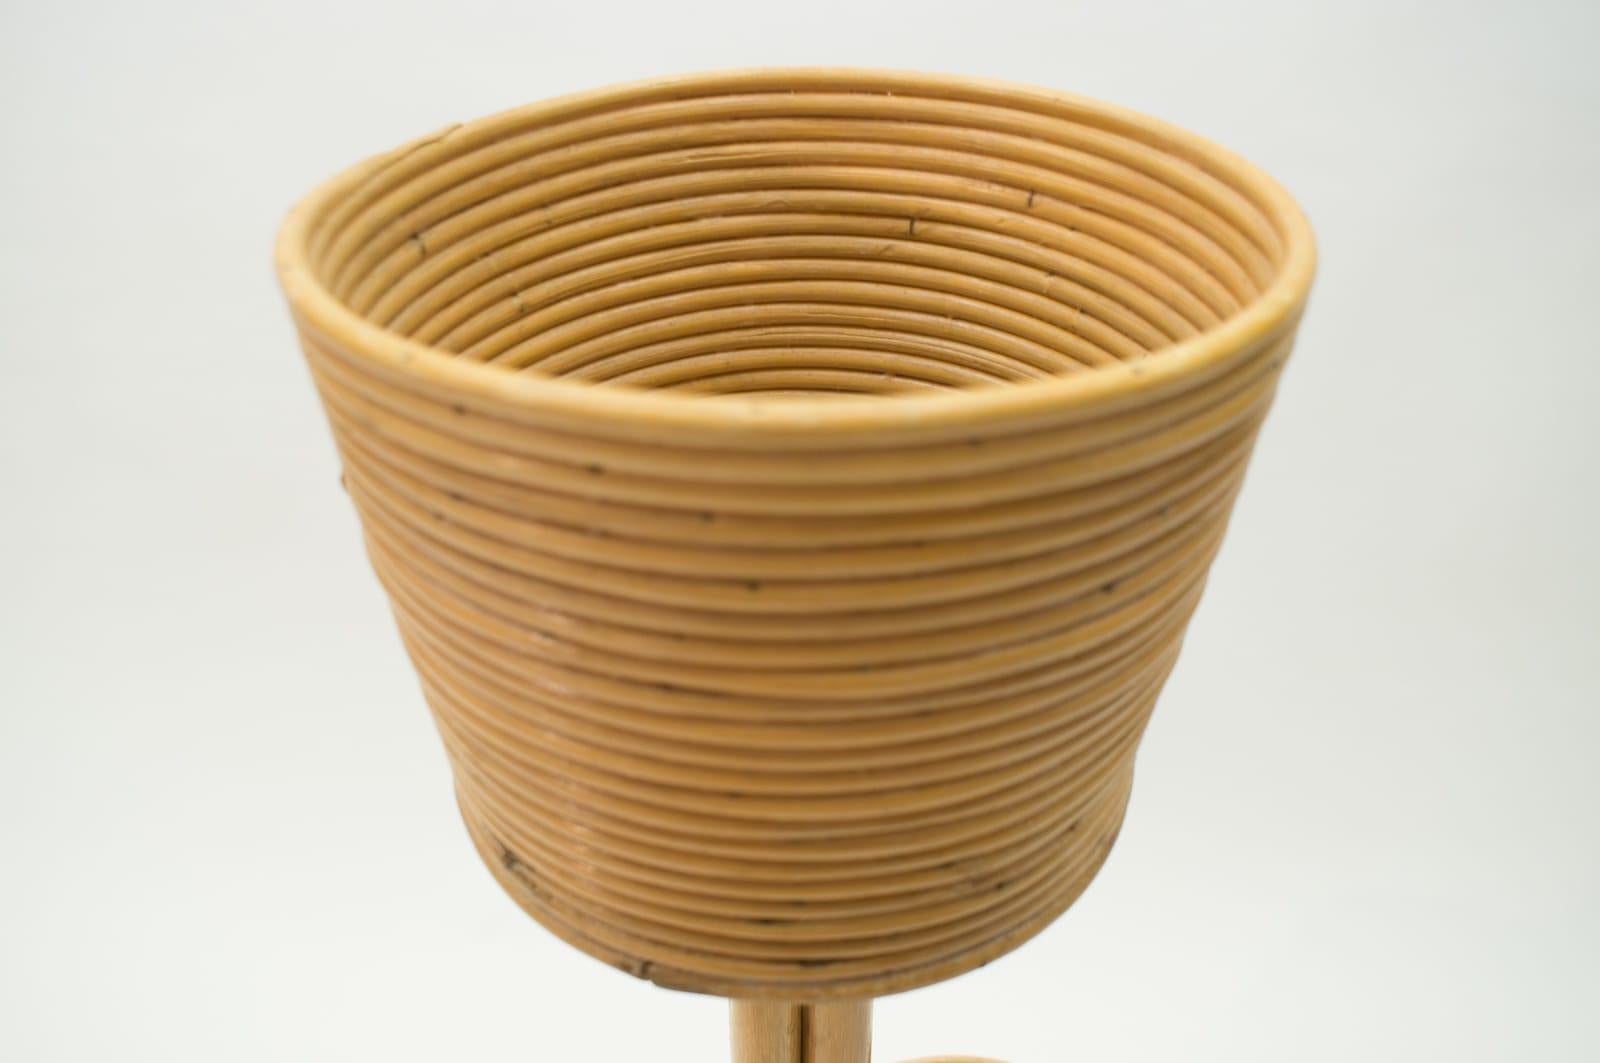 Italian Bamboo and Rattan Flower Stand or Plant Holder, 1950s For Sale 3